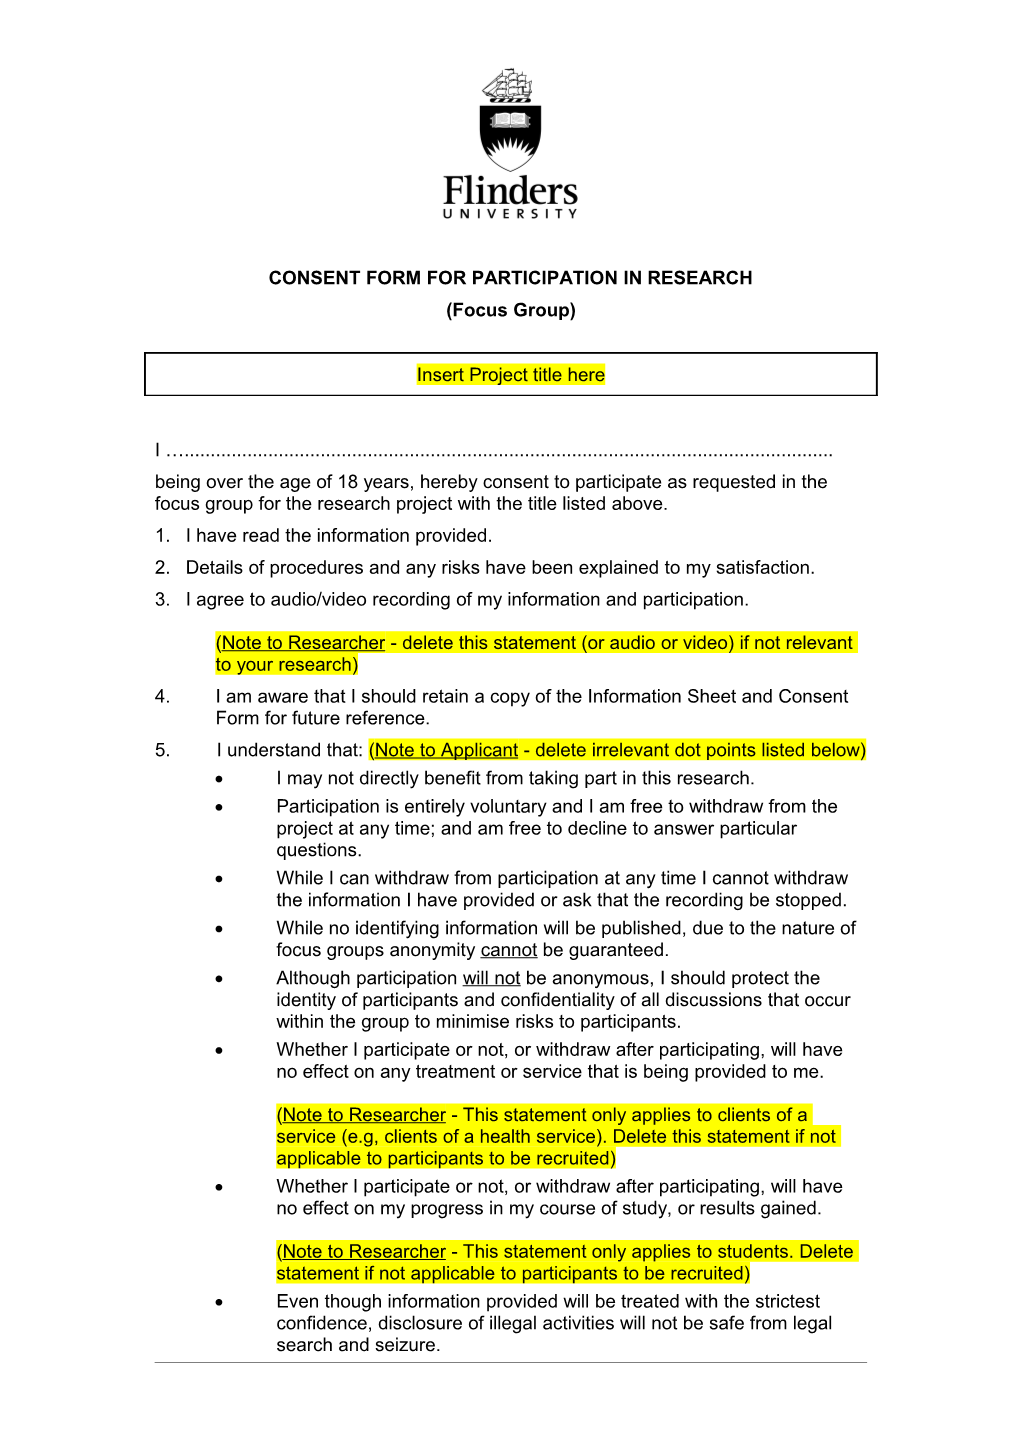 Consent Form for Participation in Research